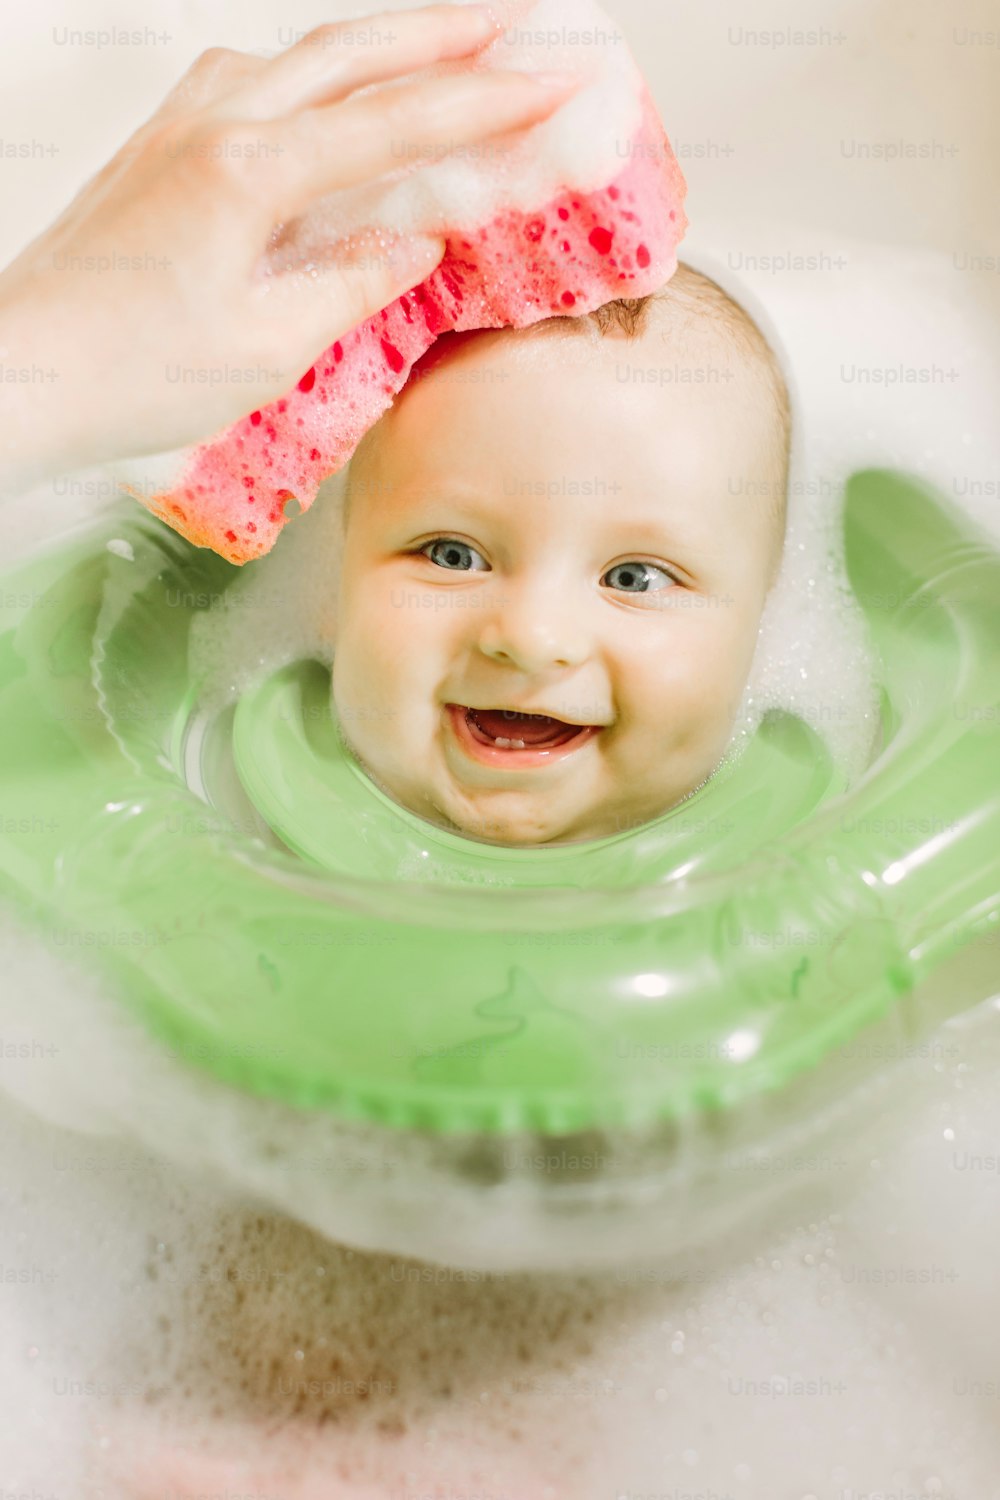 Baby swimming with green neck swim ring. Mom washing baby head with a red sponge